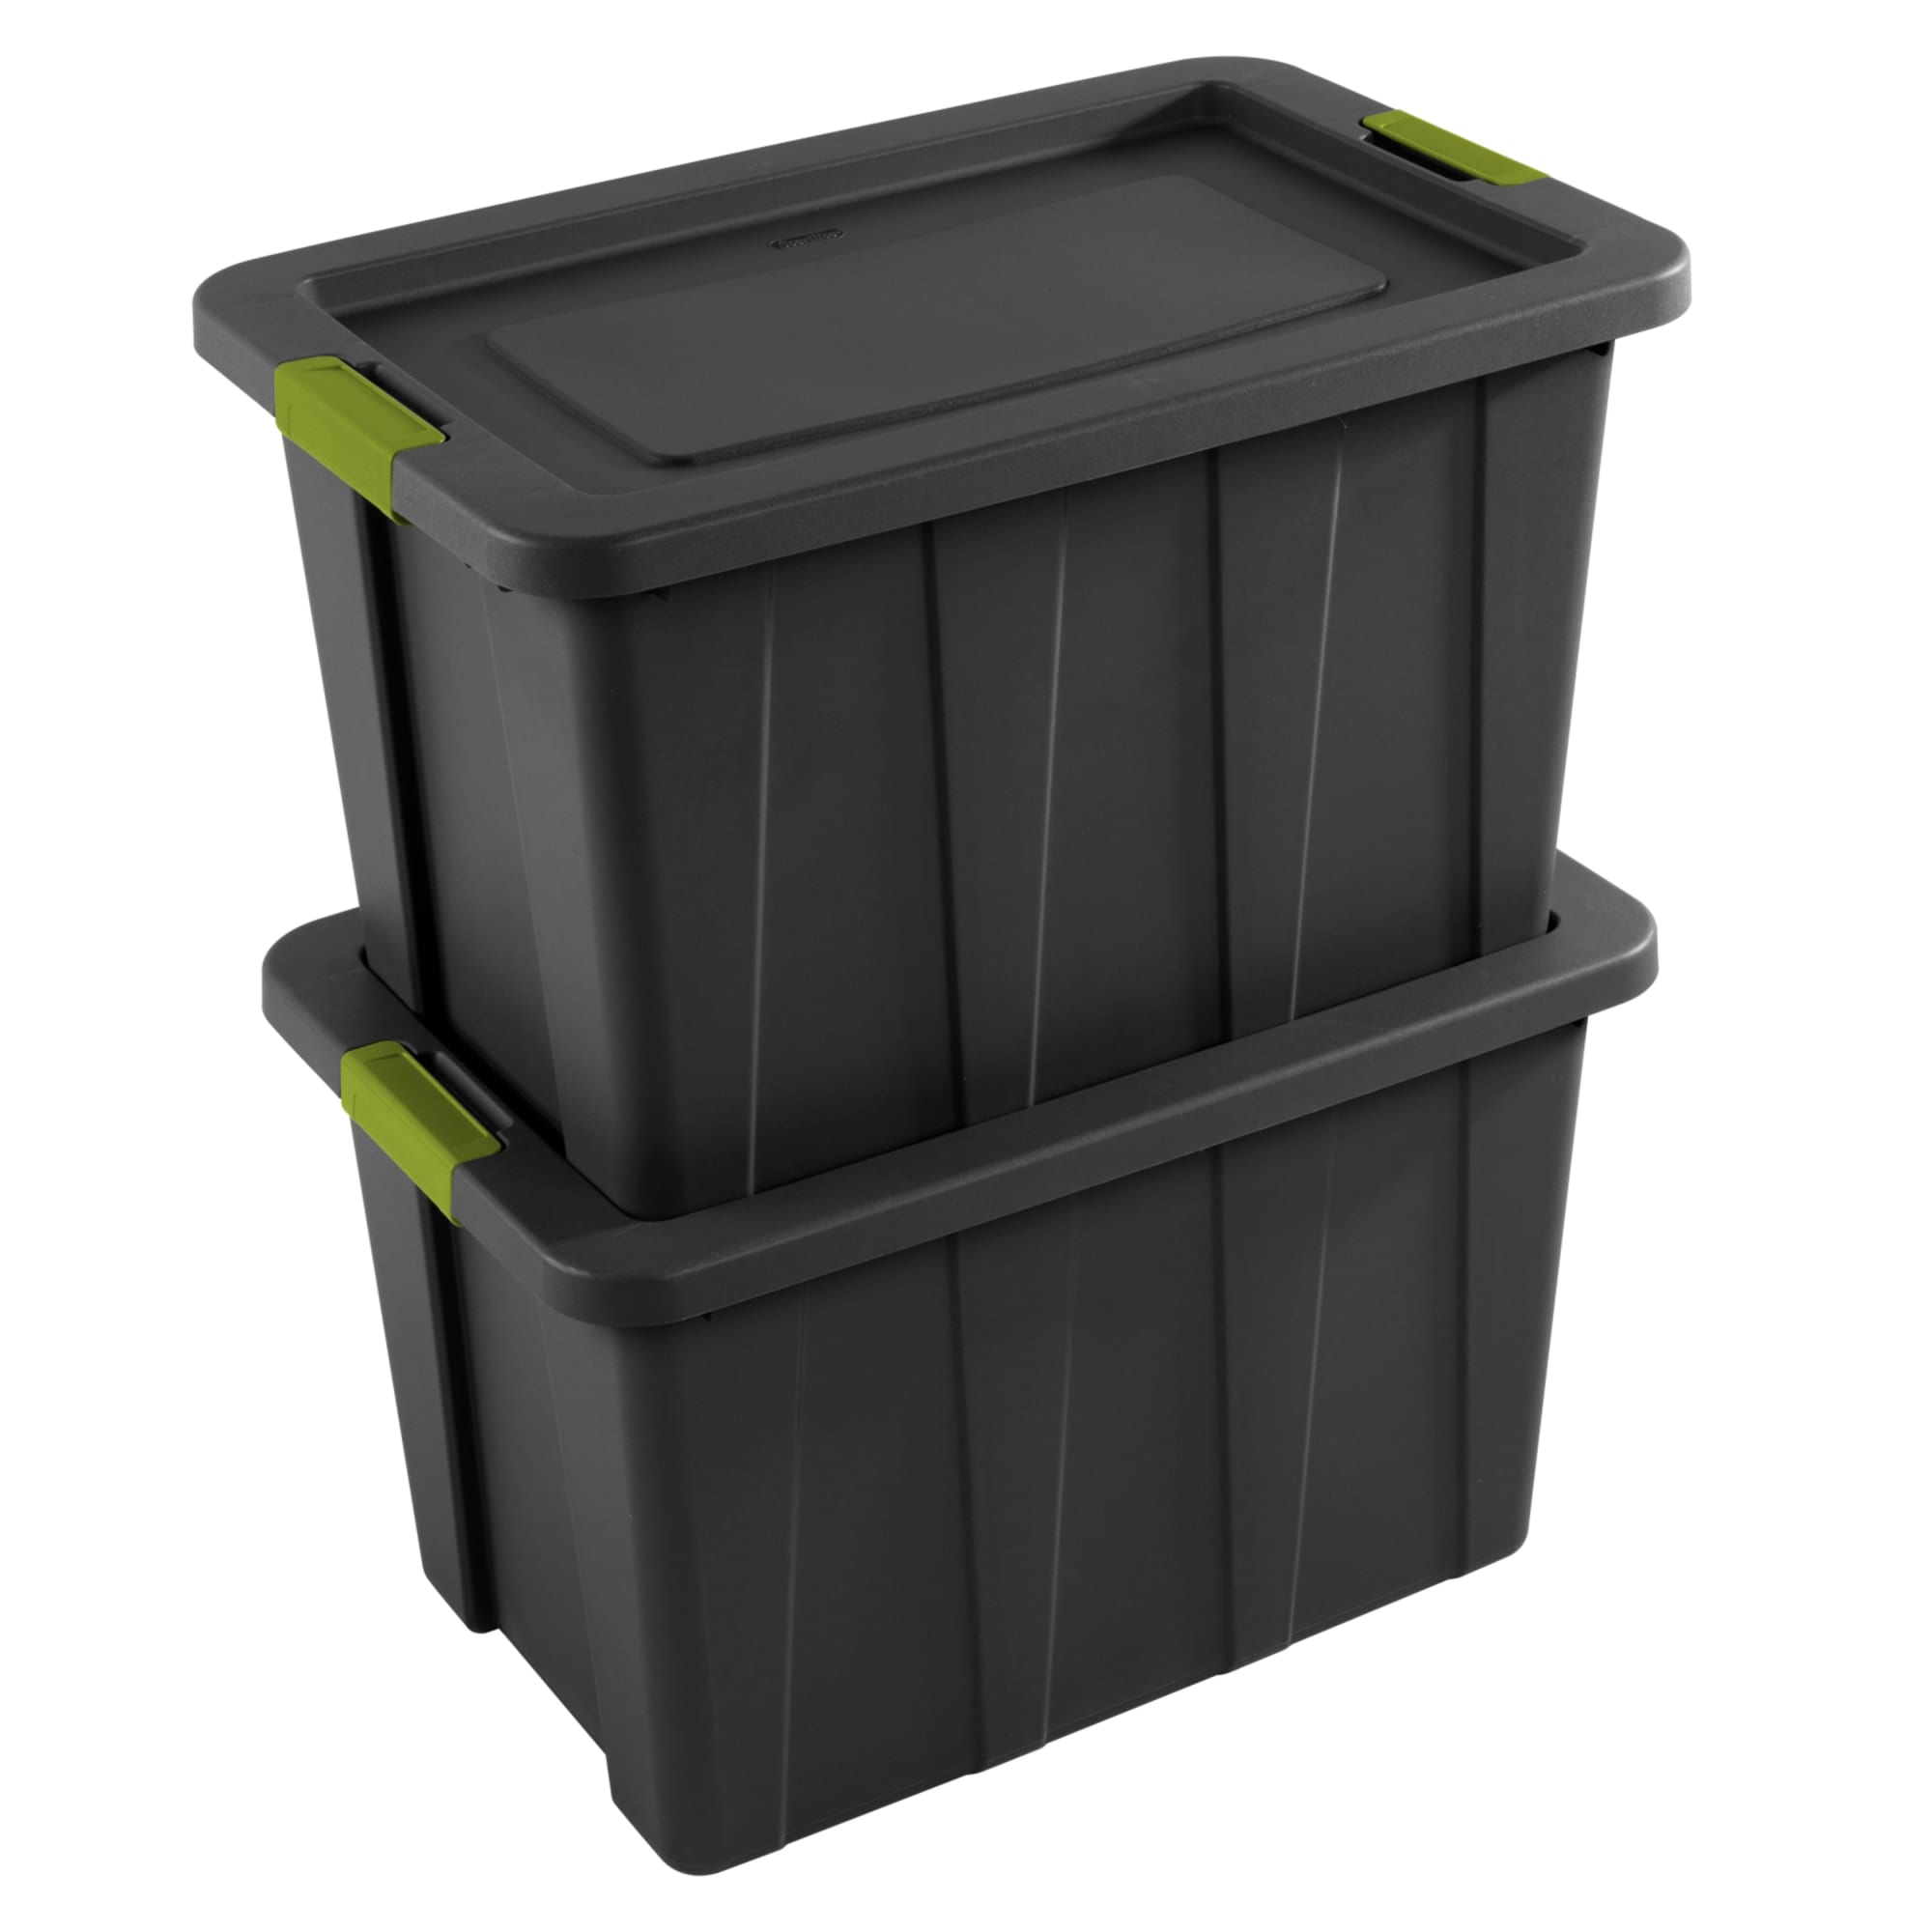 Sterilite - 35 Gallon Storage Tote Box w/Latching Container Lid 4 Pack